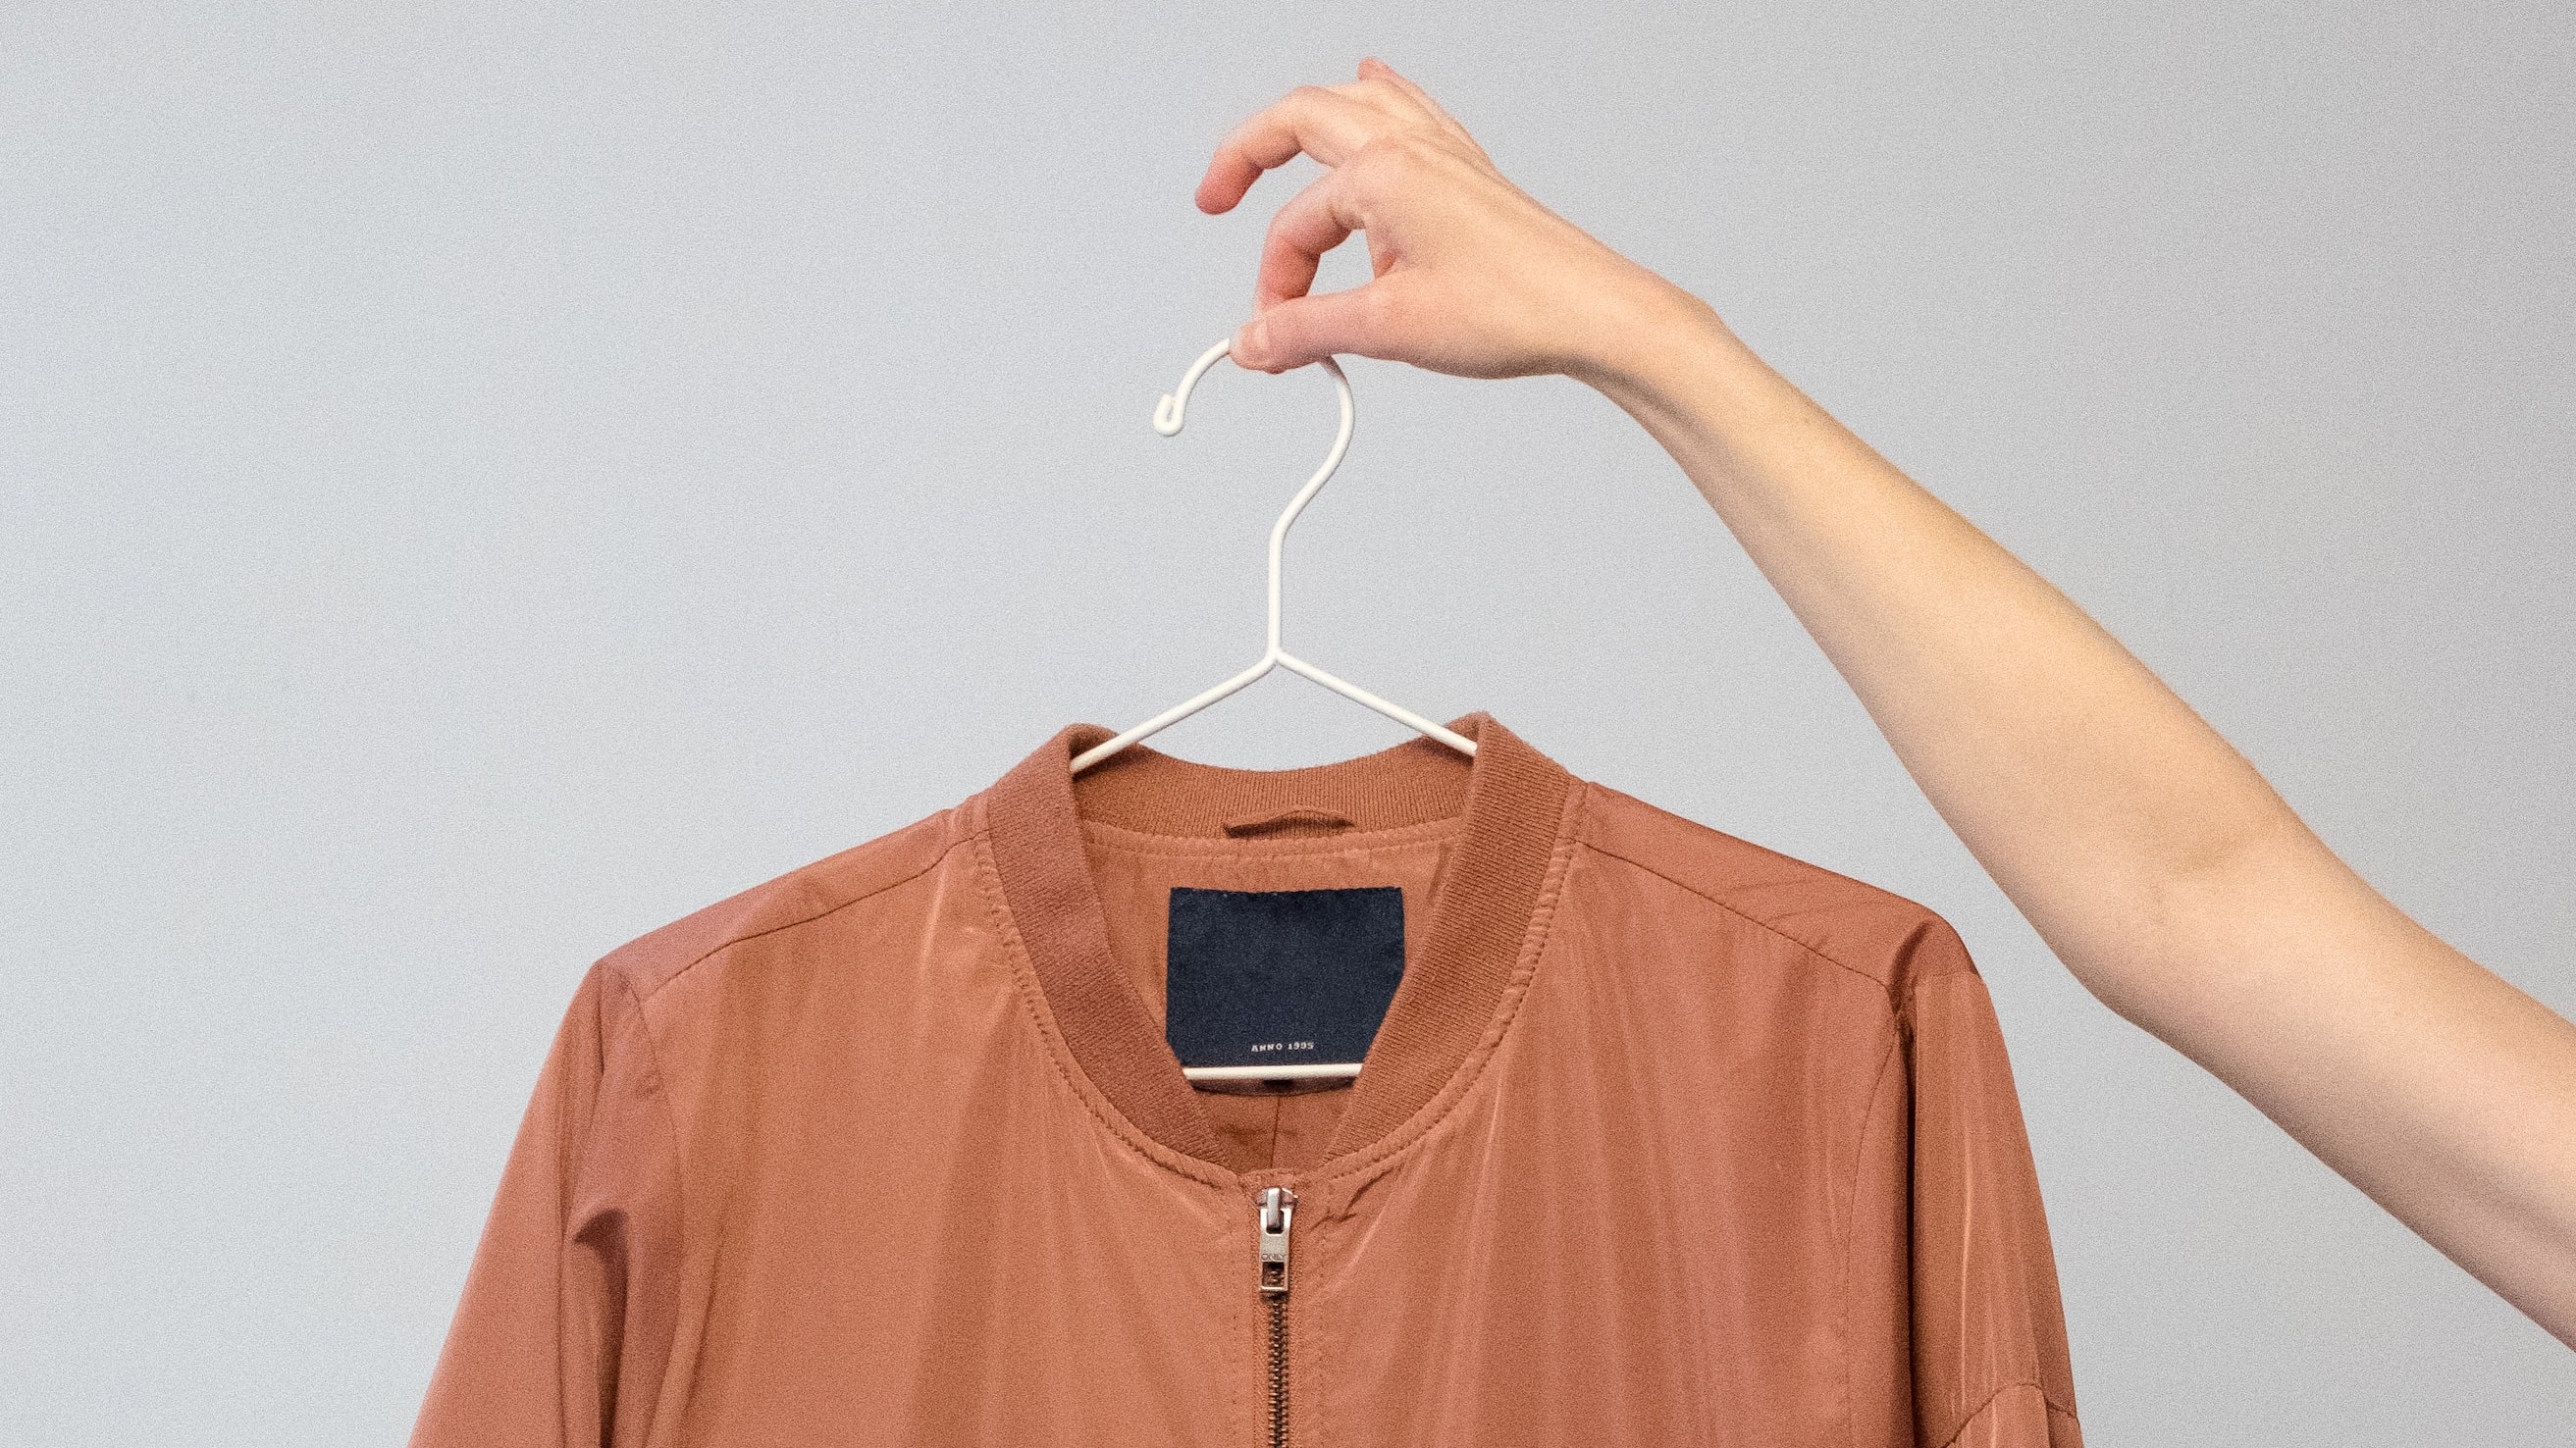 Clever Hanger Tricks for Faster Drying